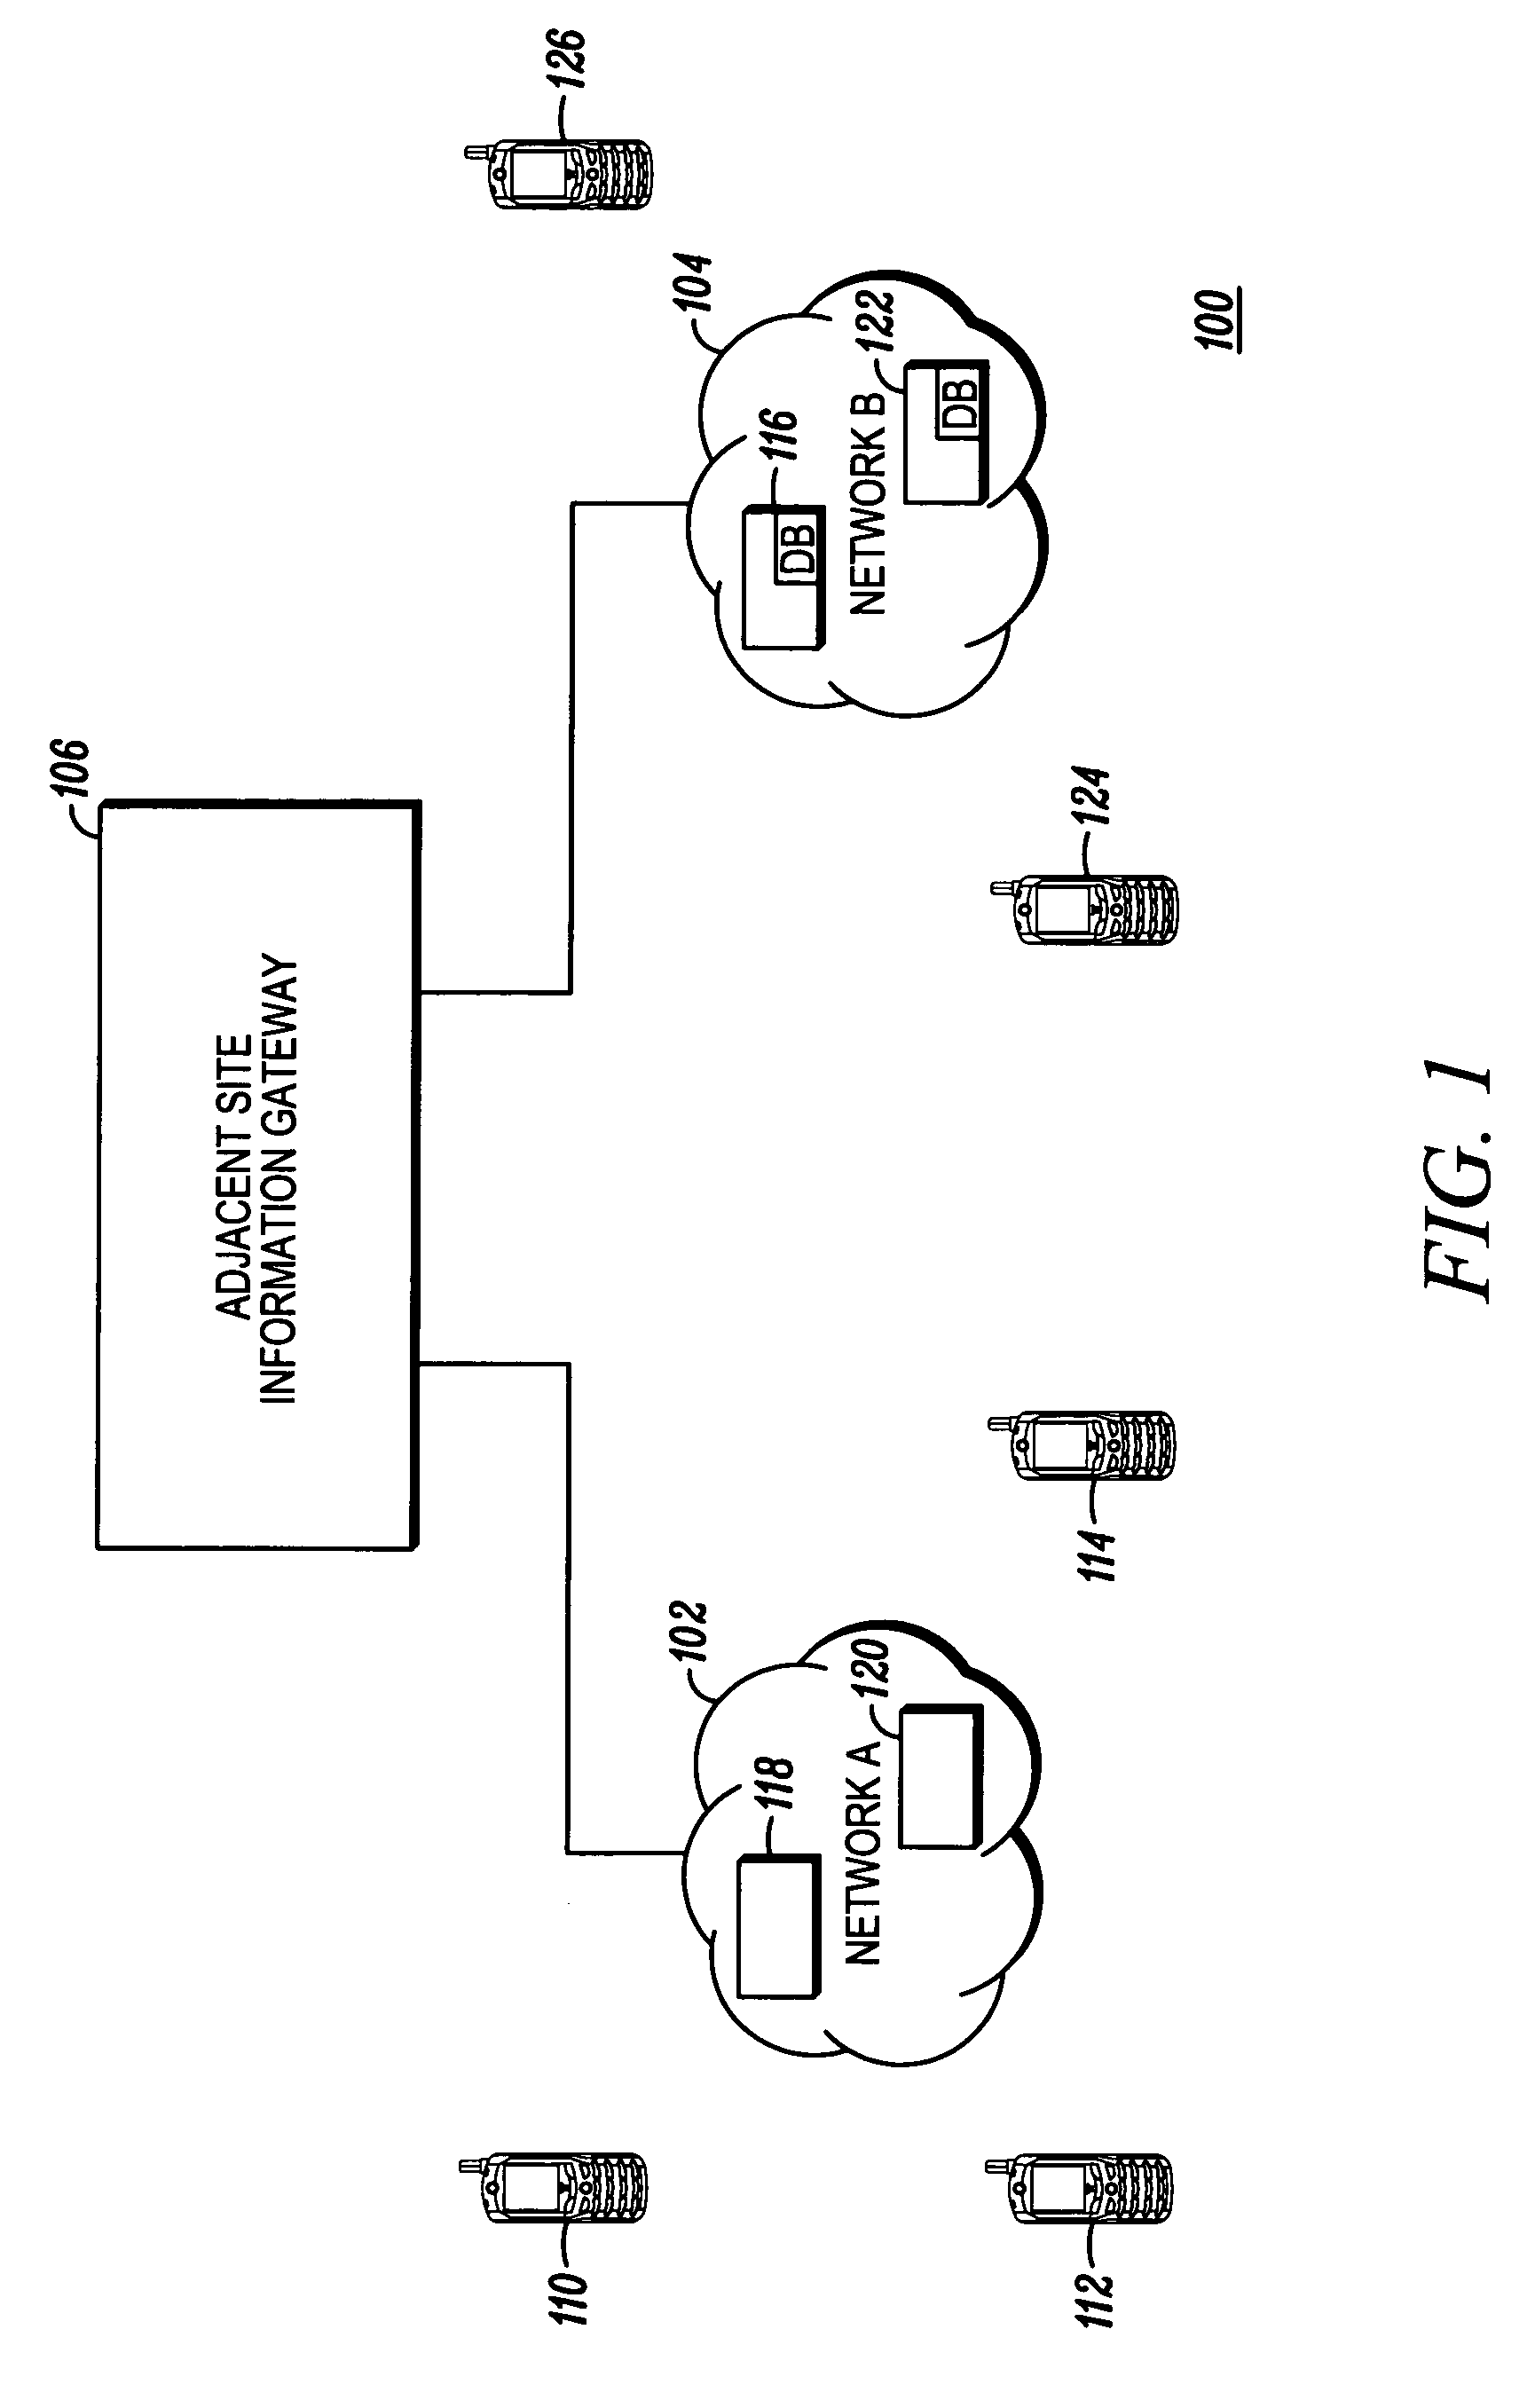 Methods for informing subscribers in a channelized network of adjacent sites